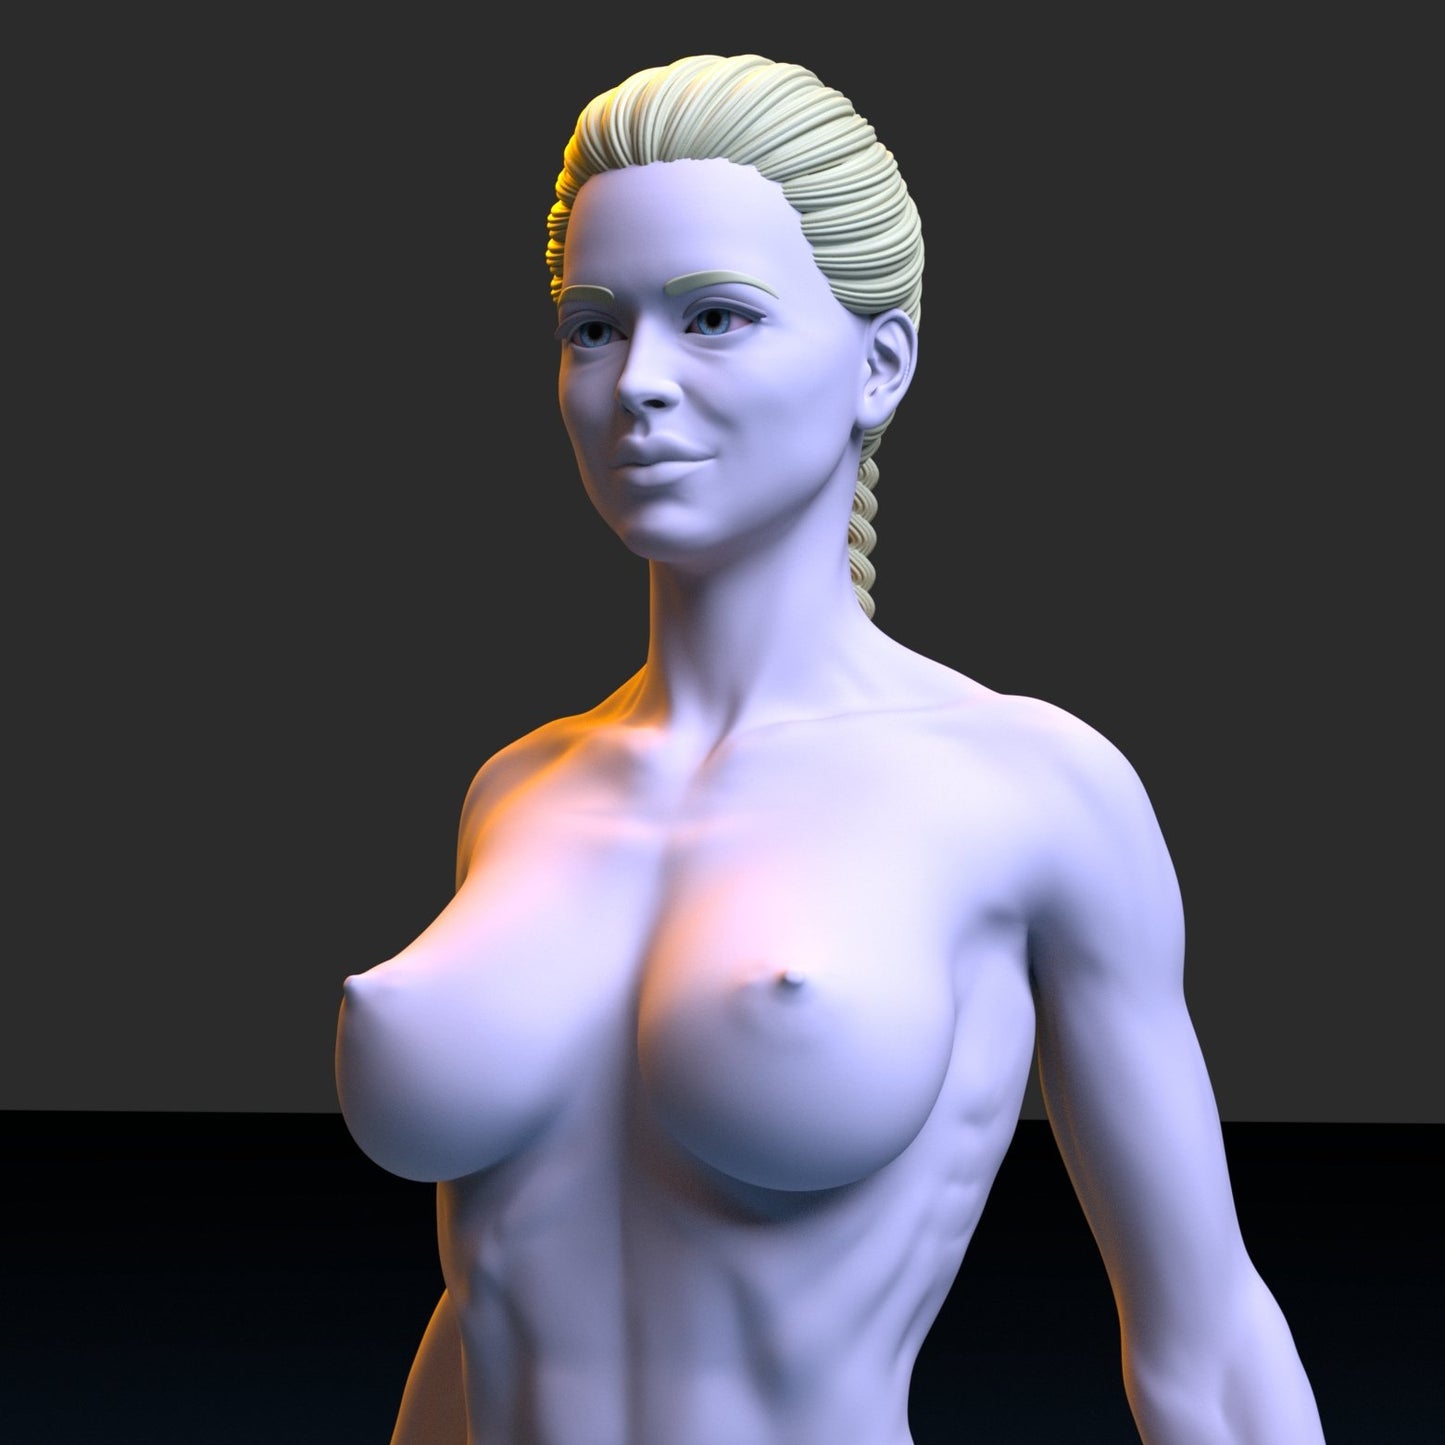 NSFW Resin Miniature Fitness Girl NSFW 3D Printed Figurine Fanart Unpainted Miniature Collectibles